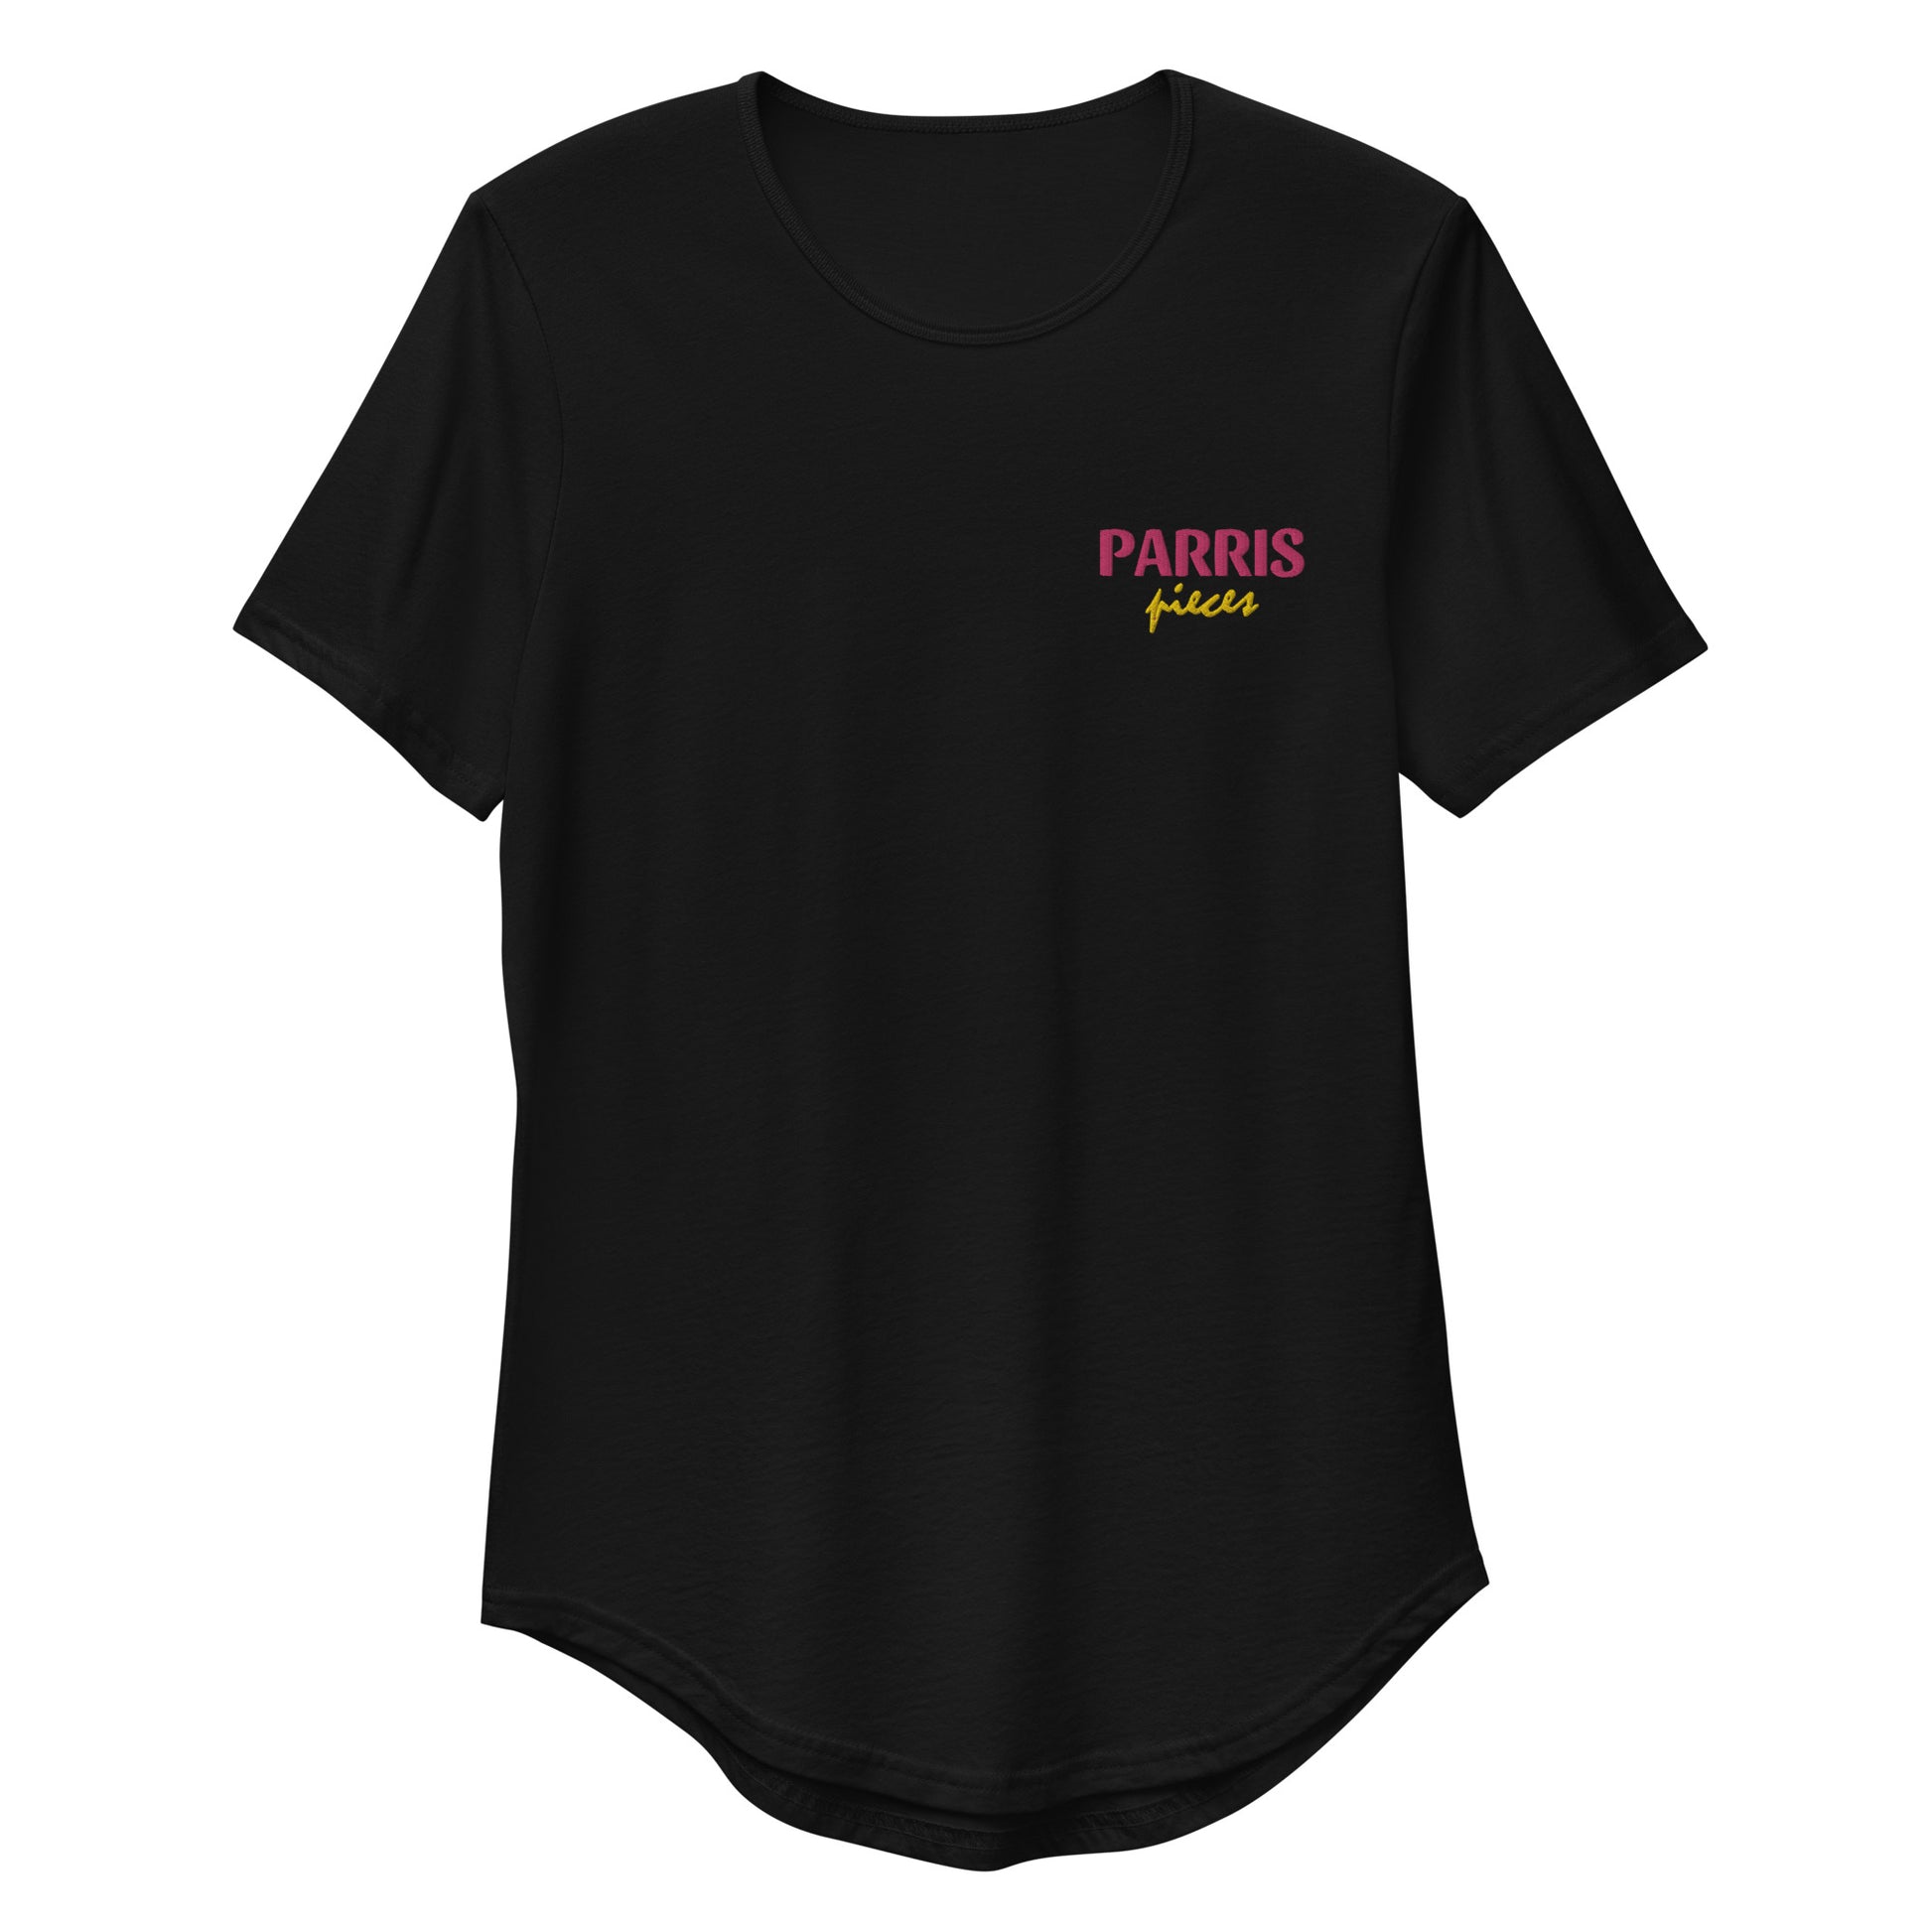 PARRISPIECES Embroidered Curved T-Shirt - ParrisPieces